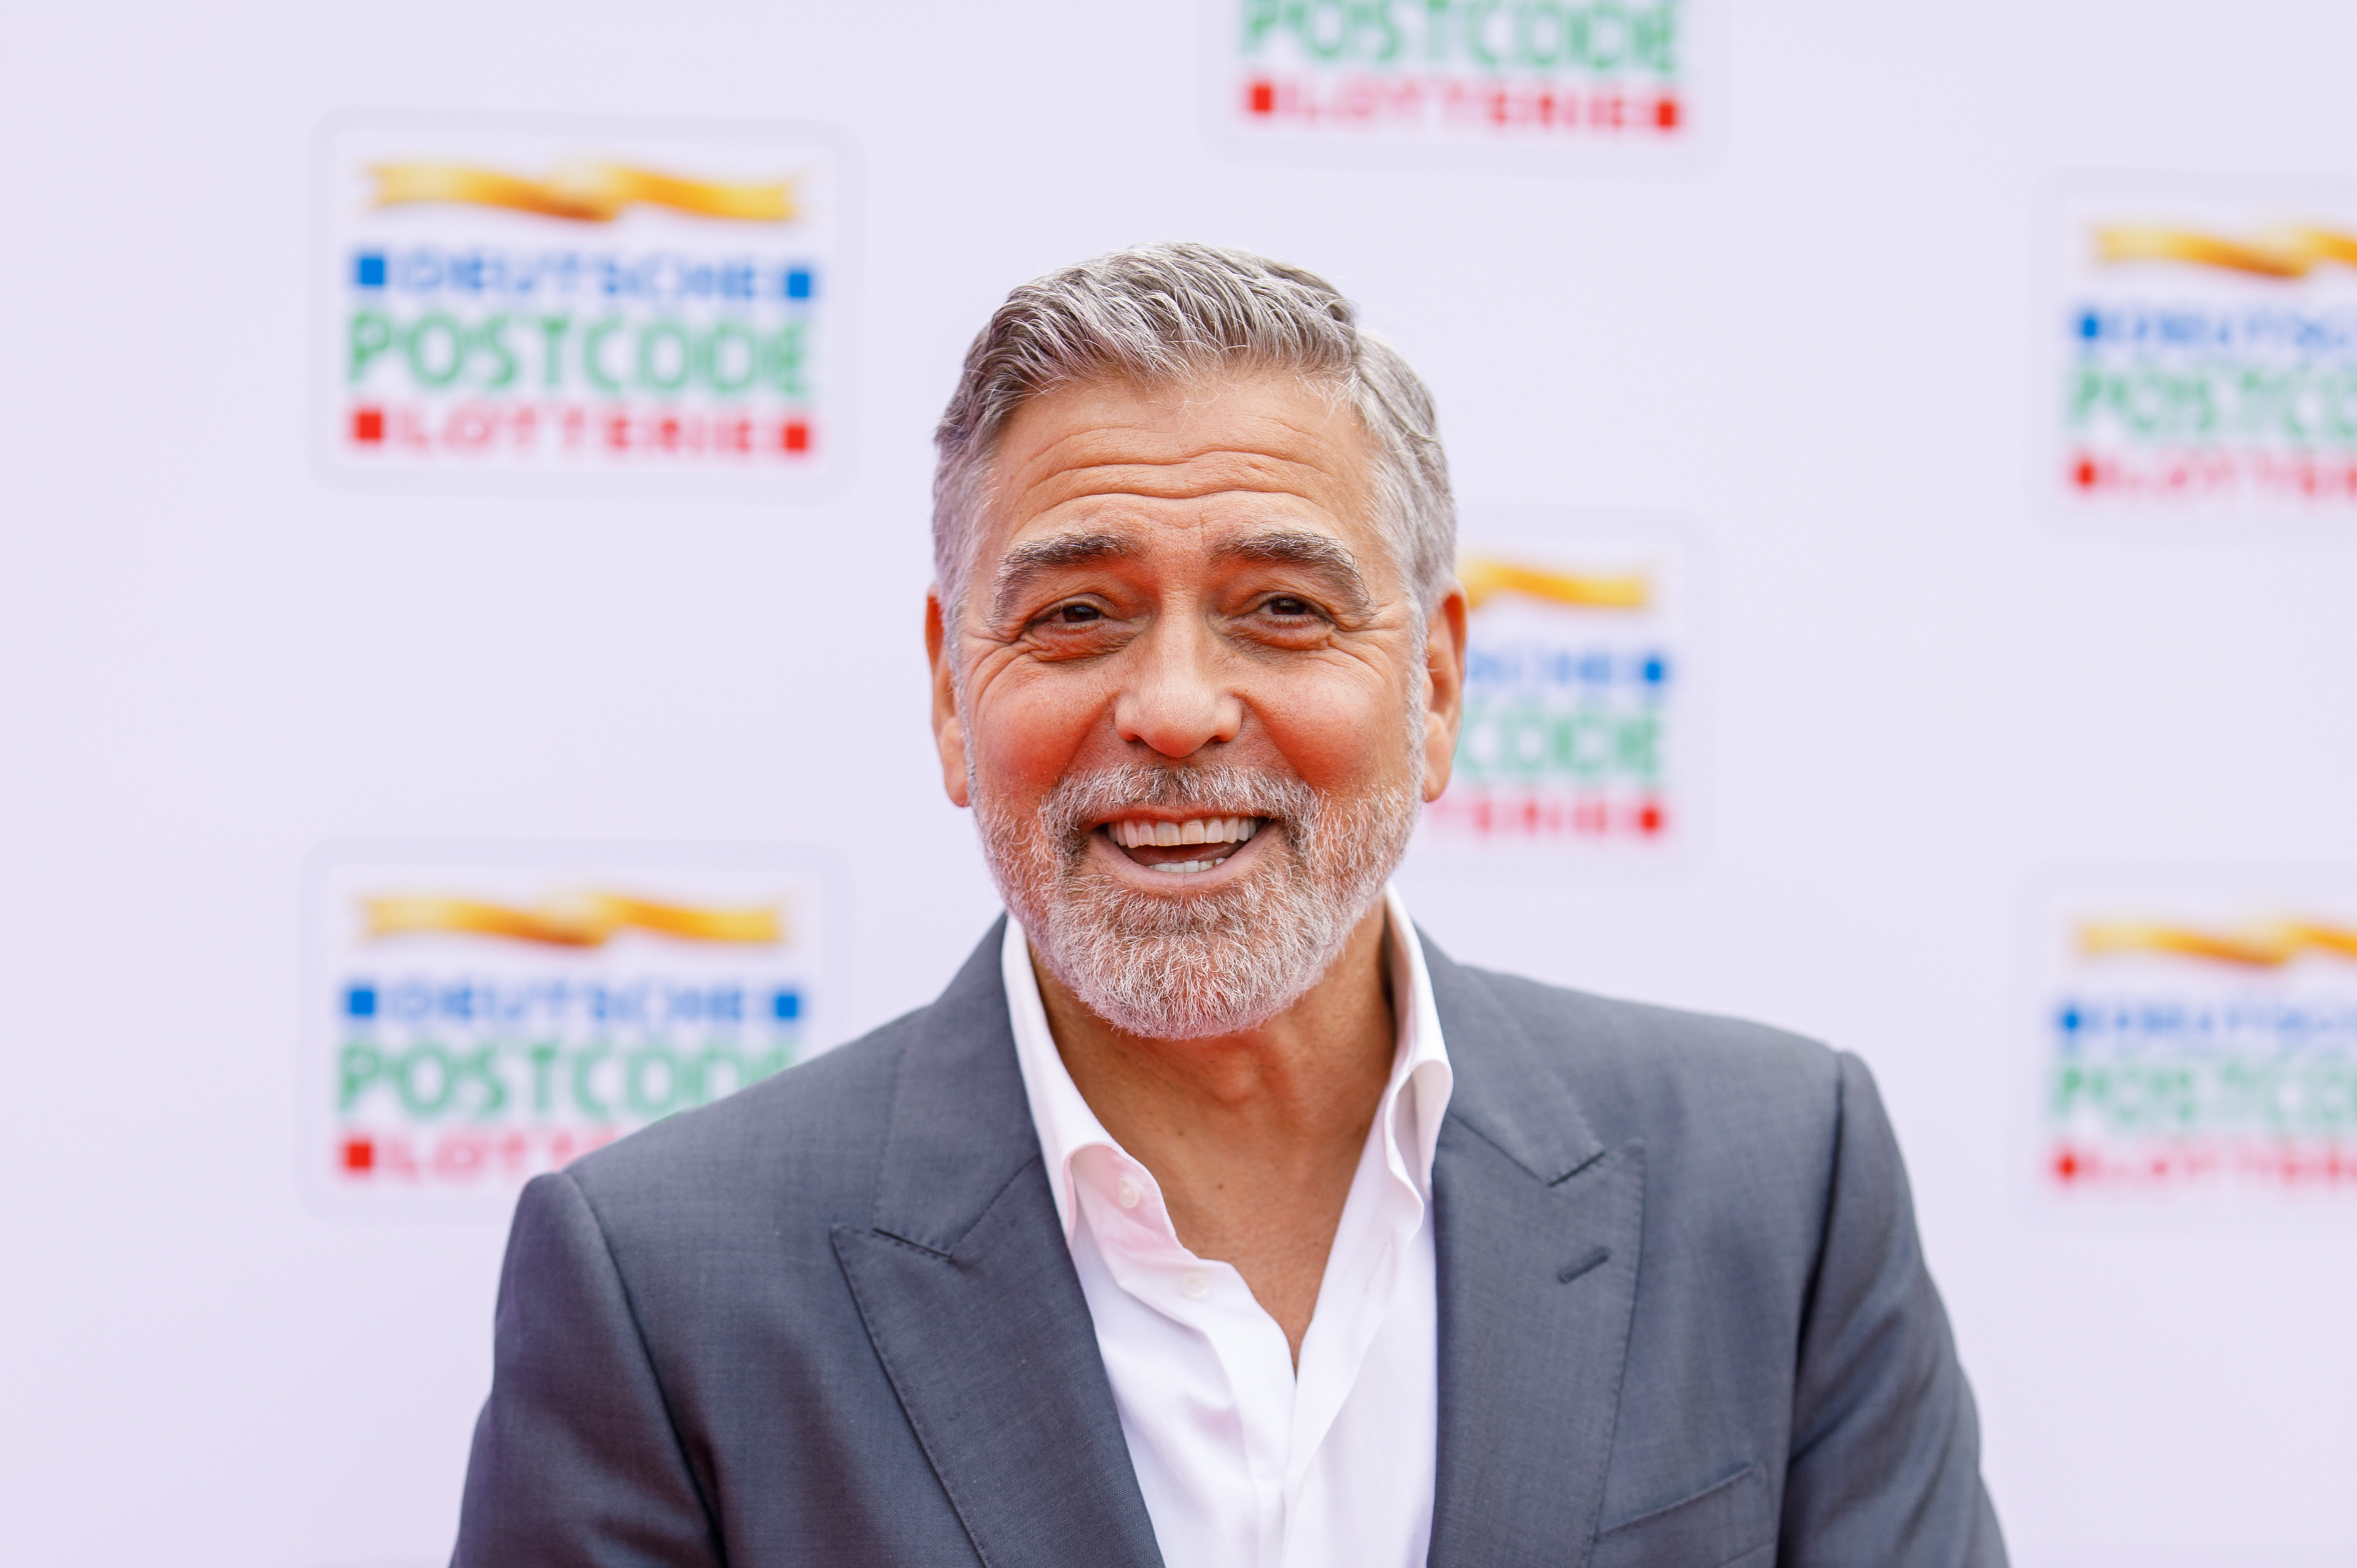 A red carpet shot of George Clooney wearing a grey suit and smiling